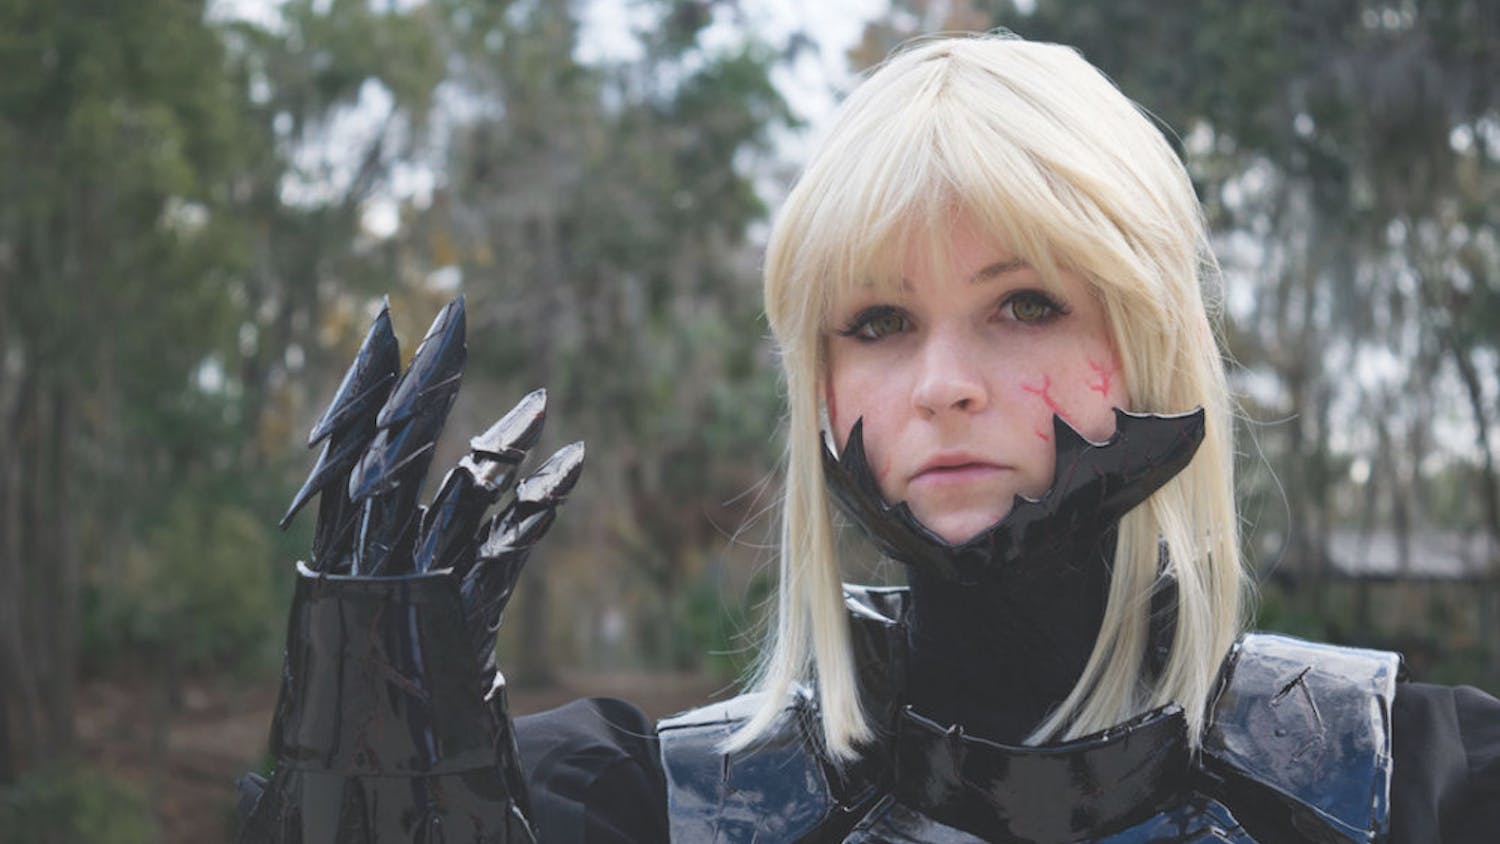 Lacey, who asked that her last name not be used, poses for a portrait on Sunday. Lacey dressed as Saber Alter, a character from the anime “Fate/stay night.”
&nbsp;